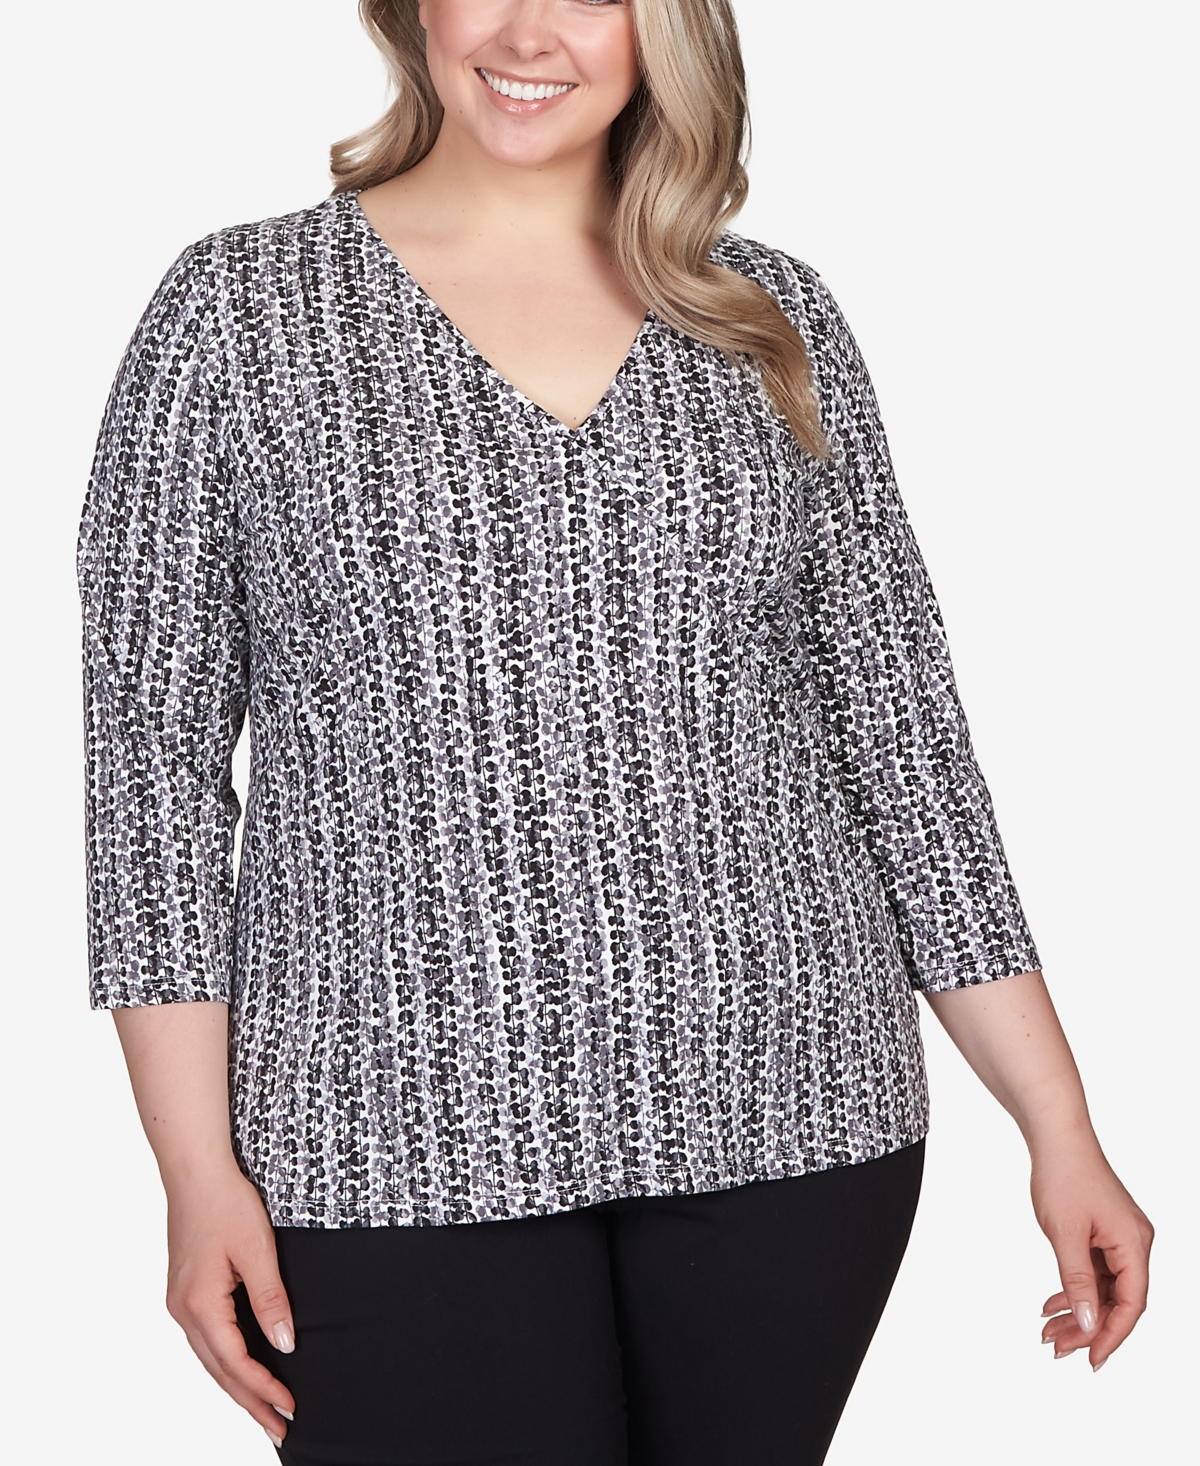 Plus Size All About Olive 3/4 Sleeve Stretch Jersey Top - Black Multi